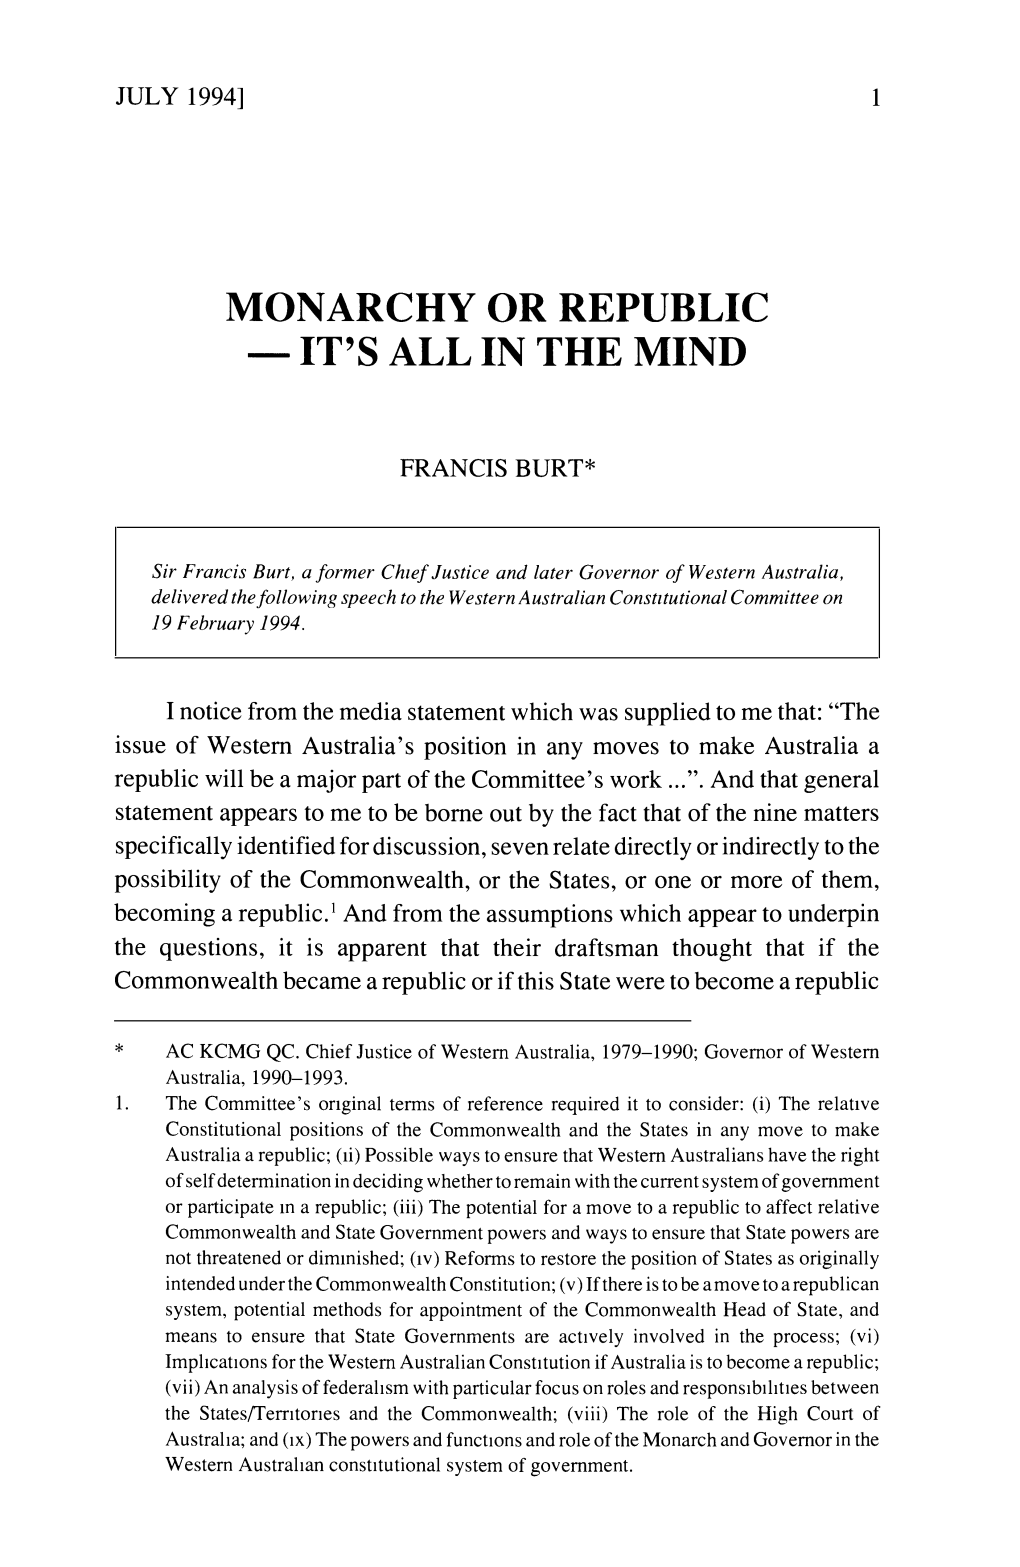 Monarchy Or Republic - It's All in the Mind